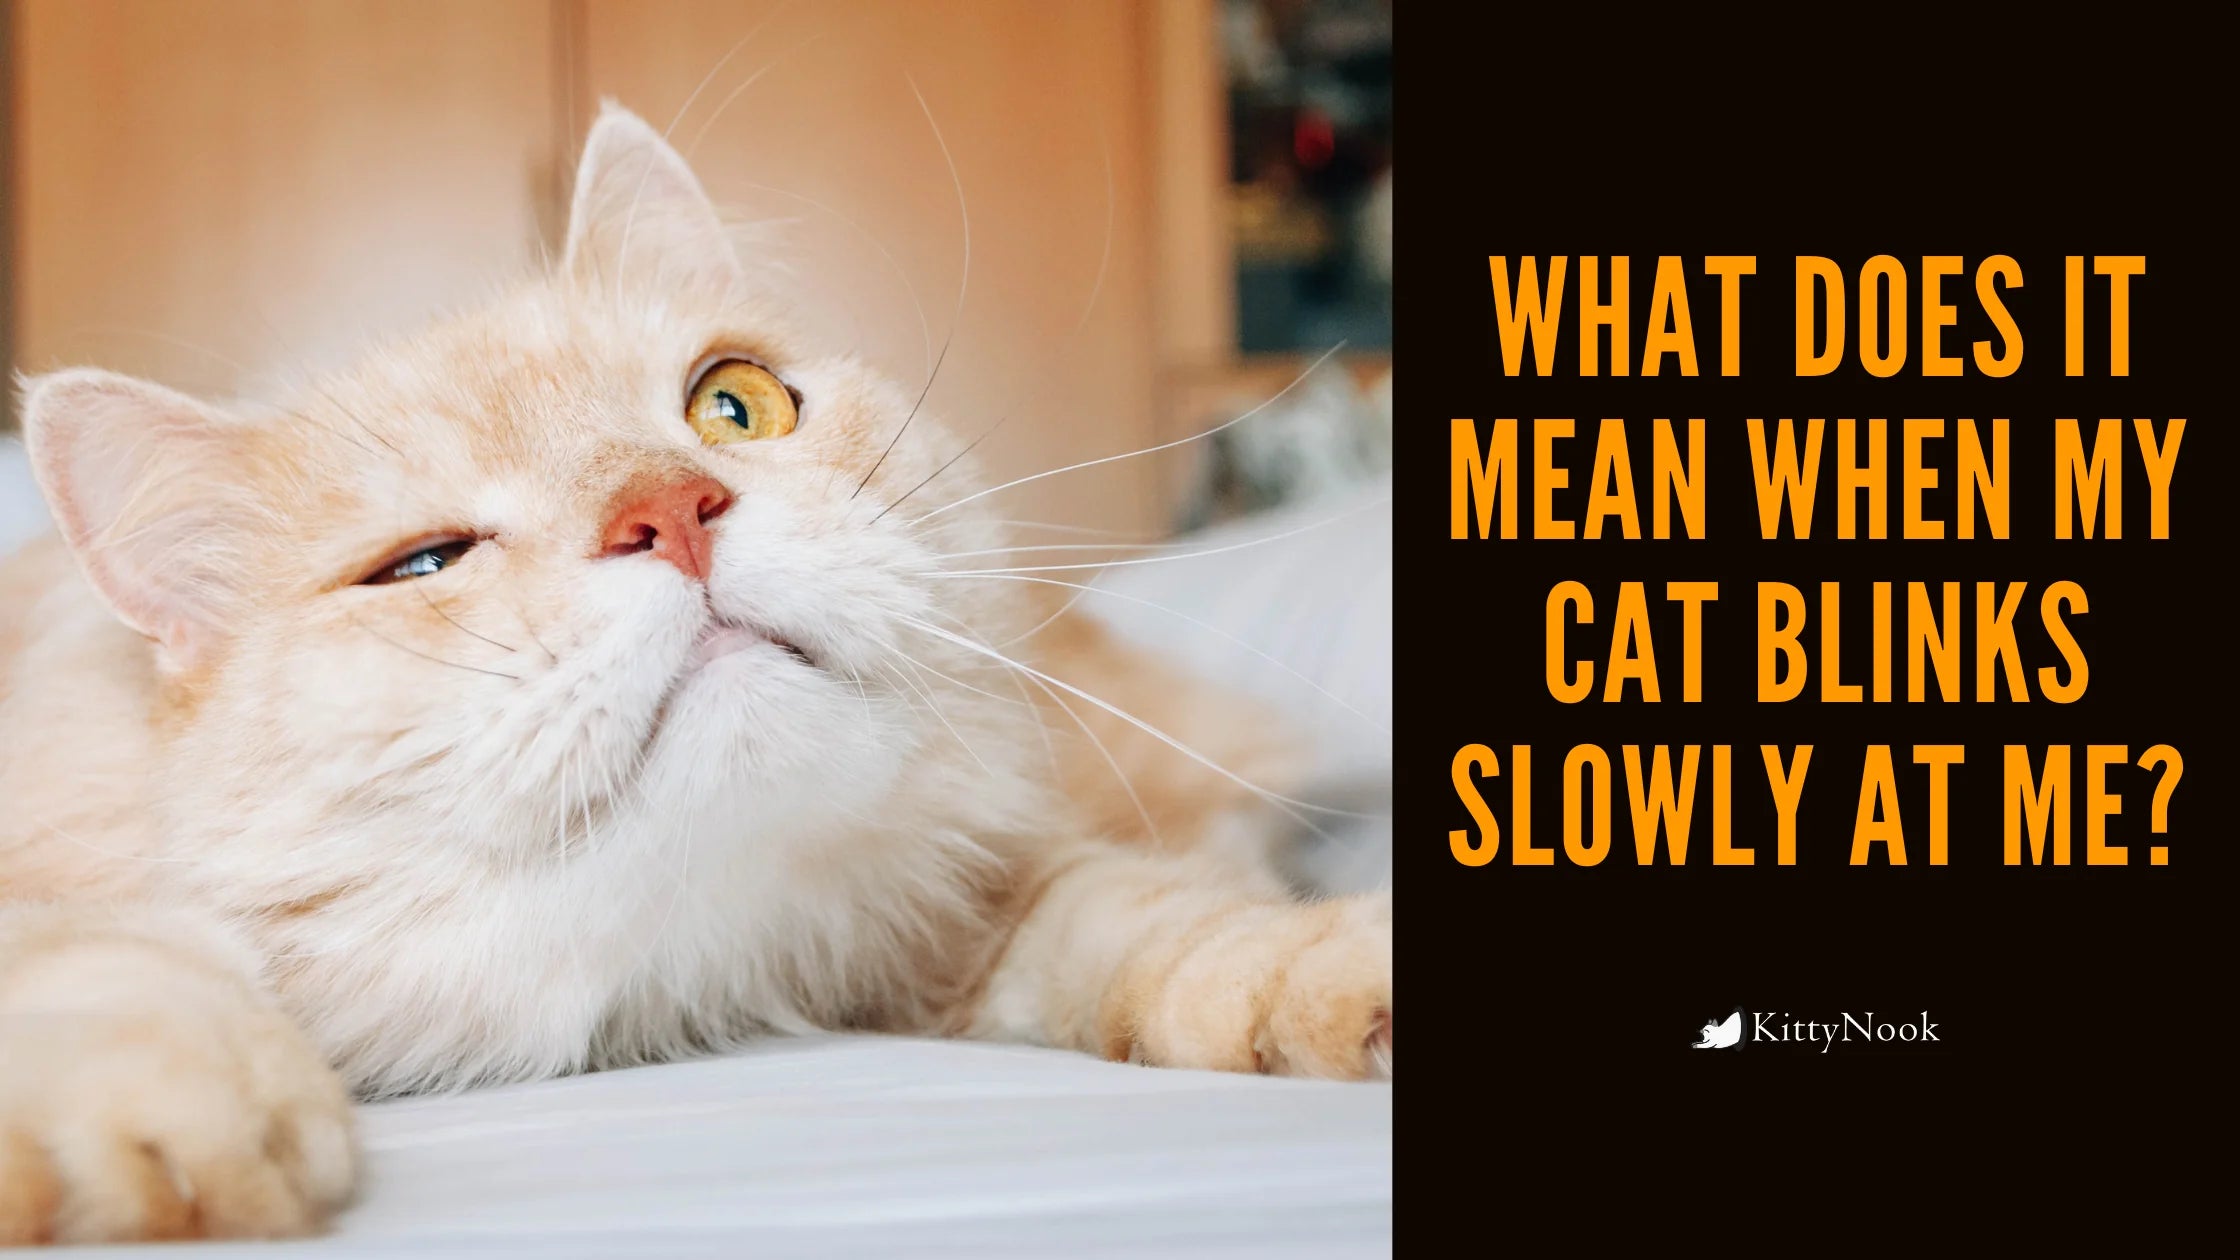 What Does It Mean When My Cat Blinks Slowly at Me? - KittyNook Cat Company